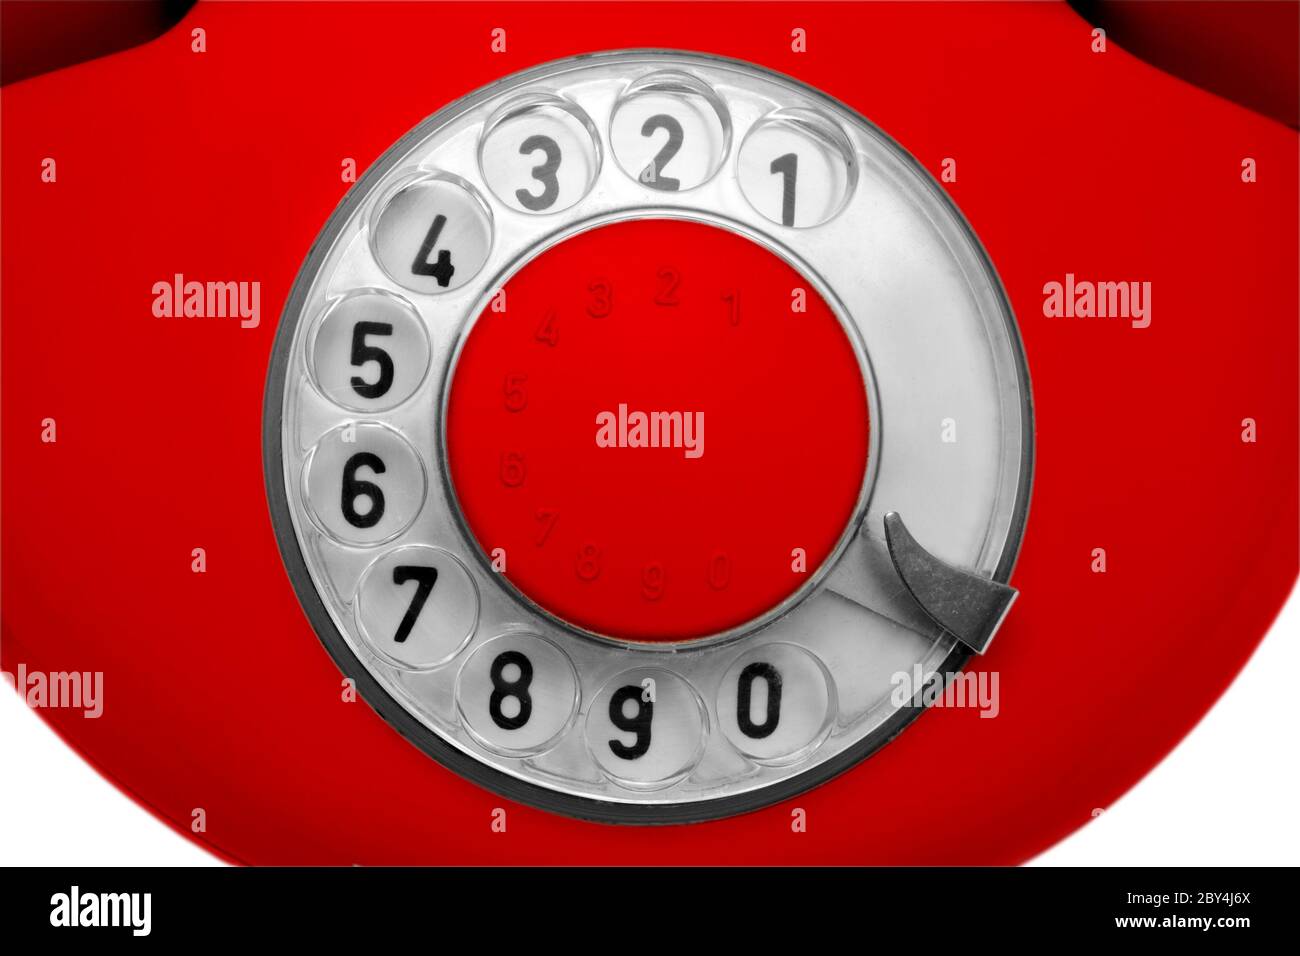 old red telephone dial Stock Photo